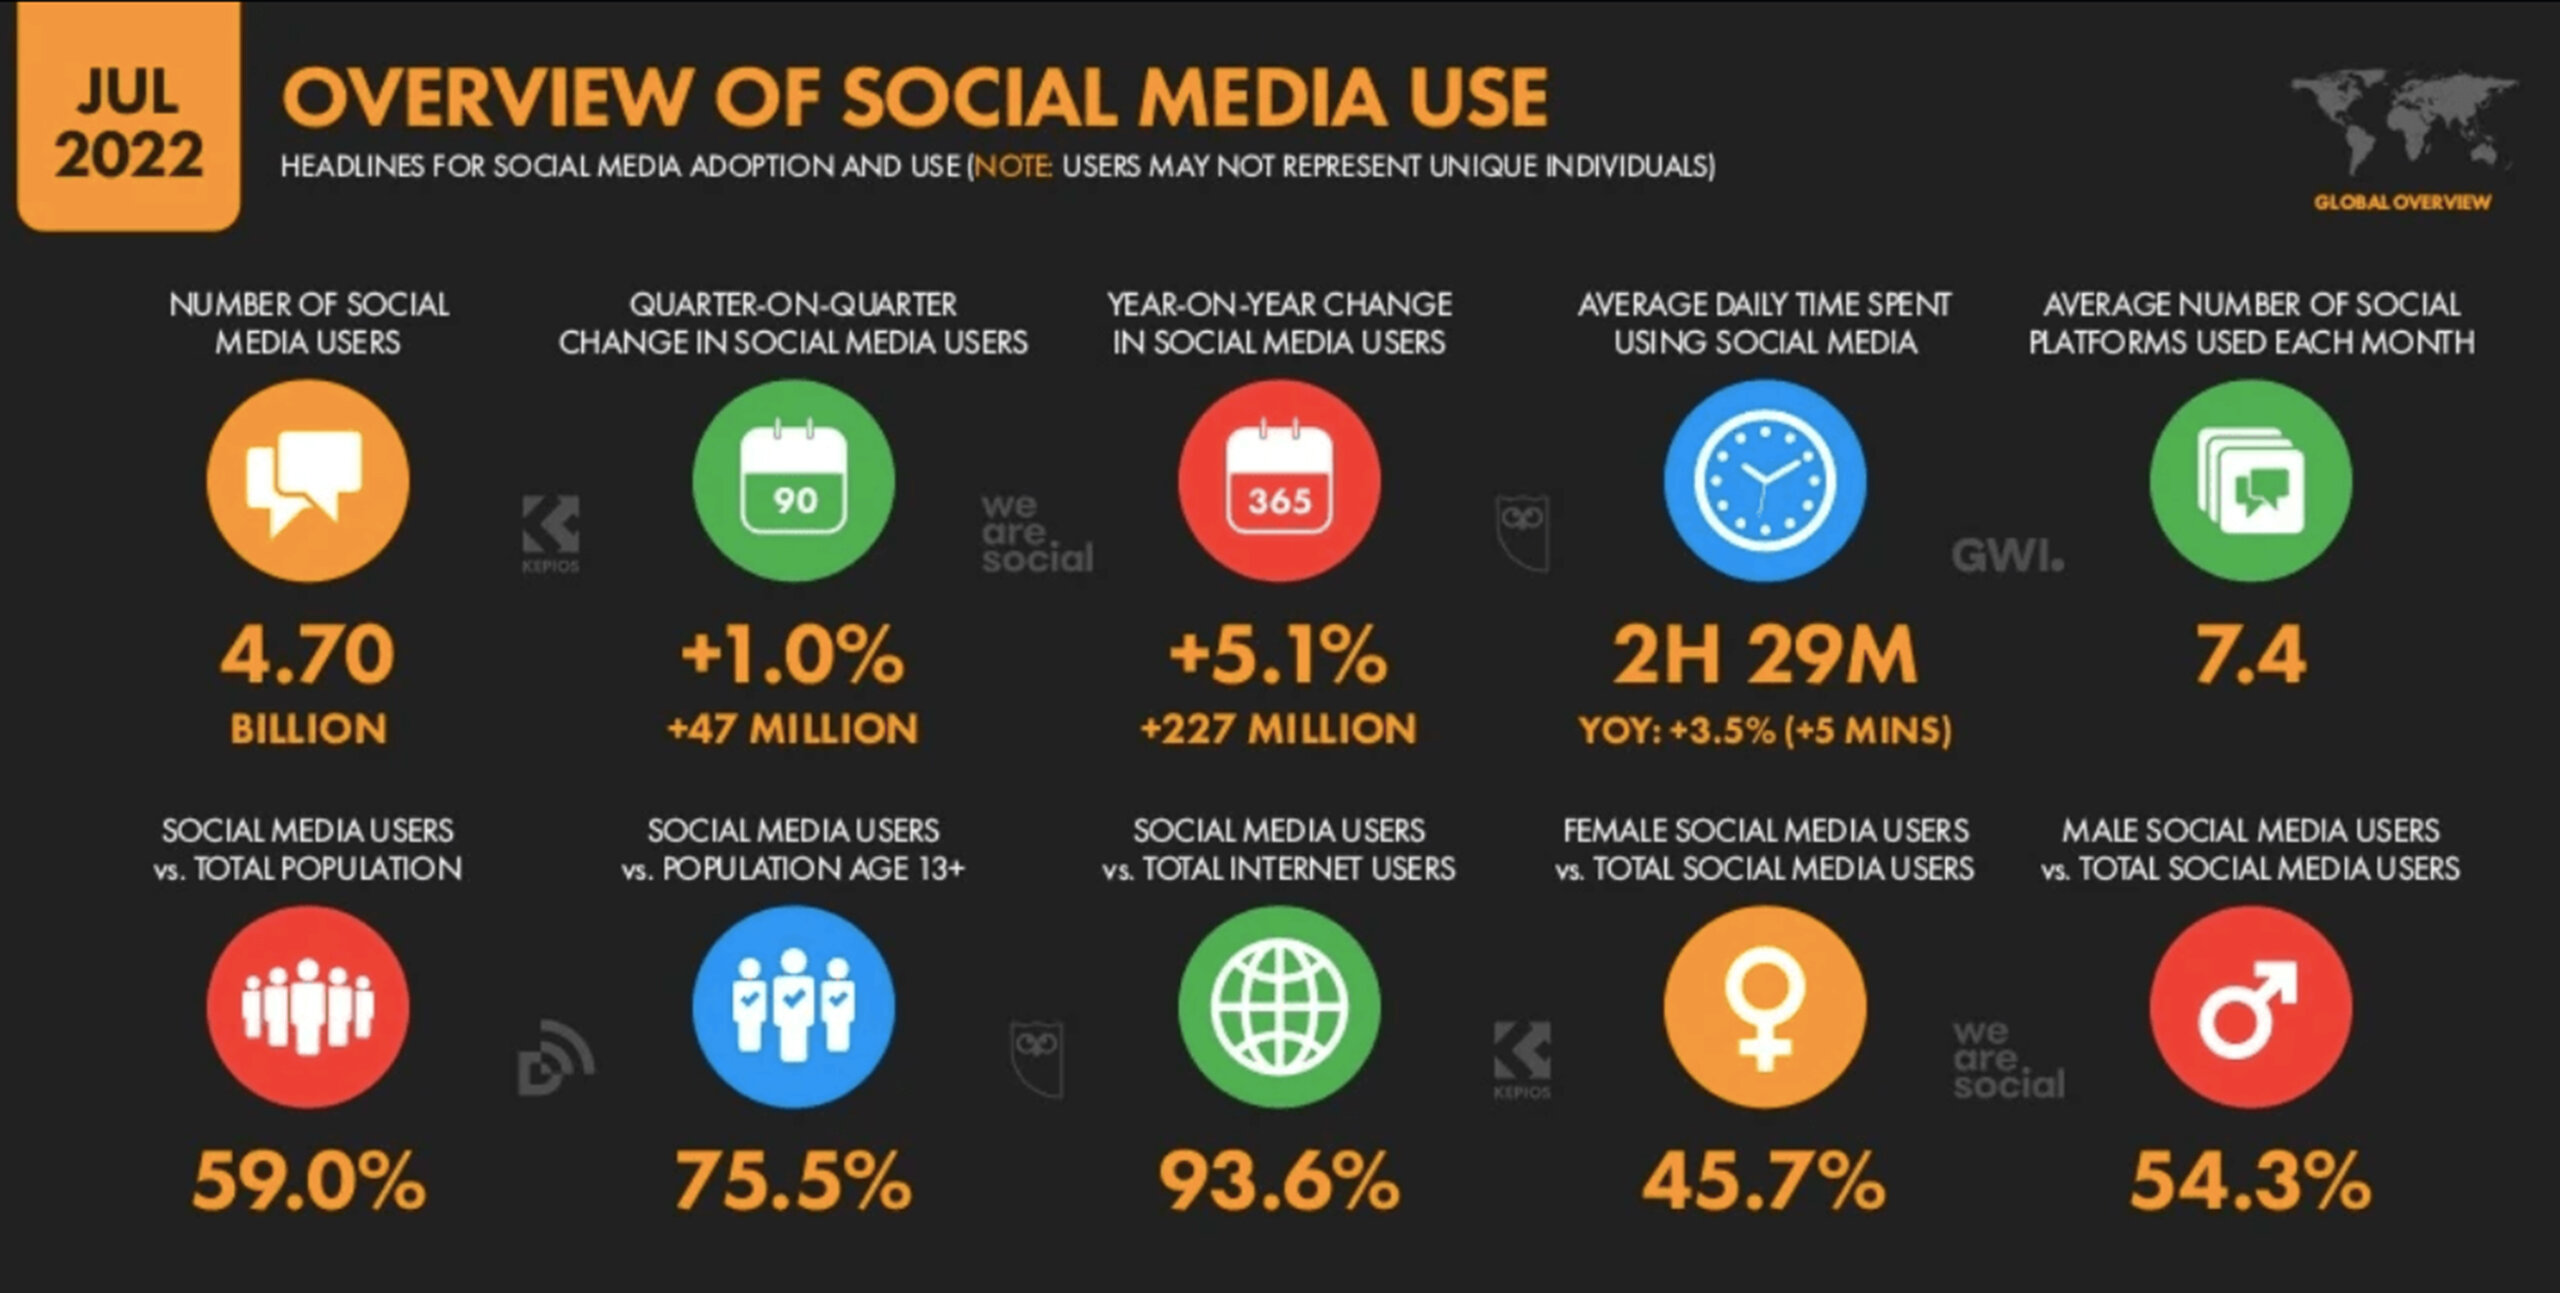 An Overview of Social Media Usage